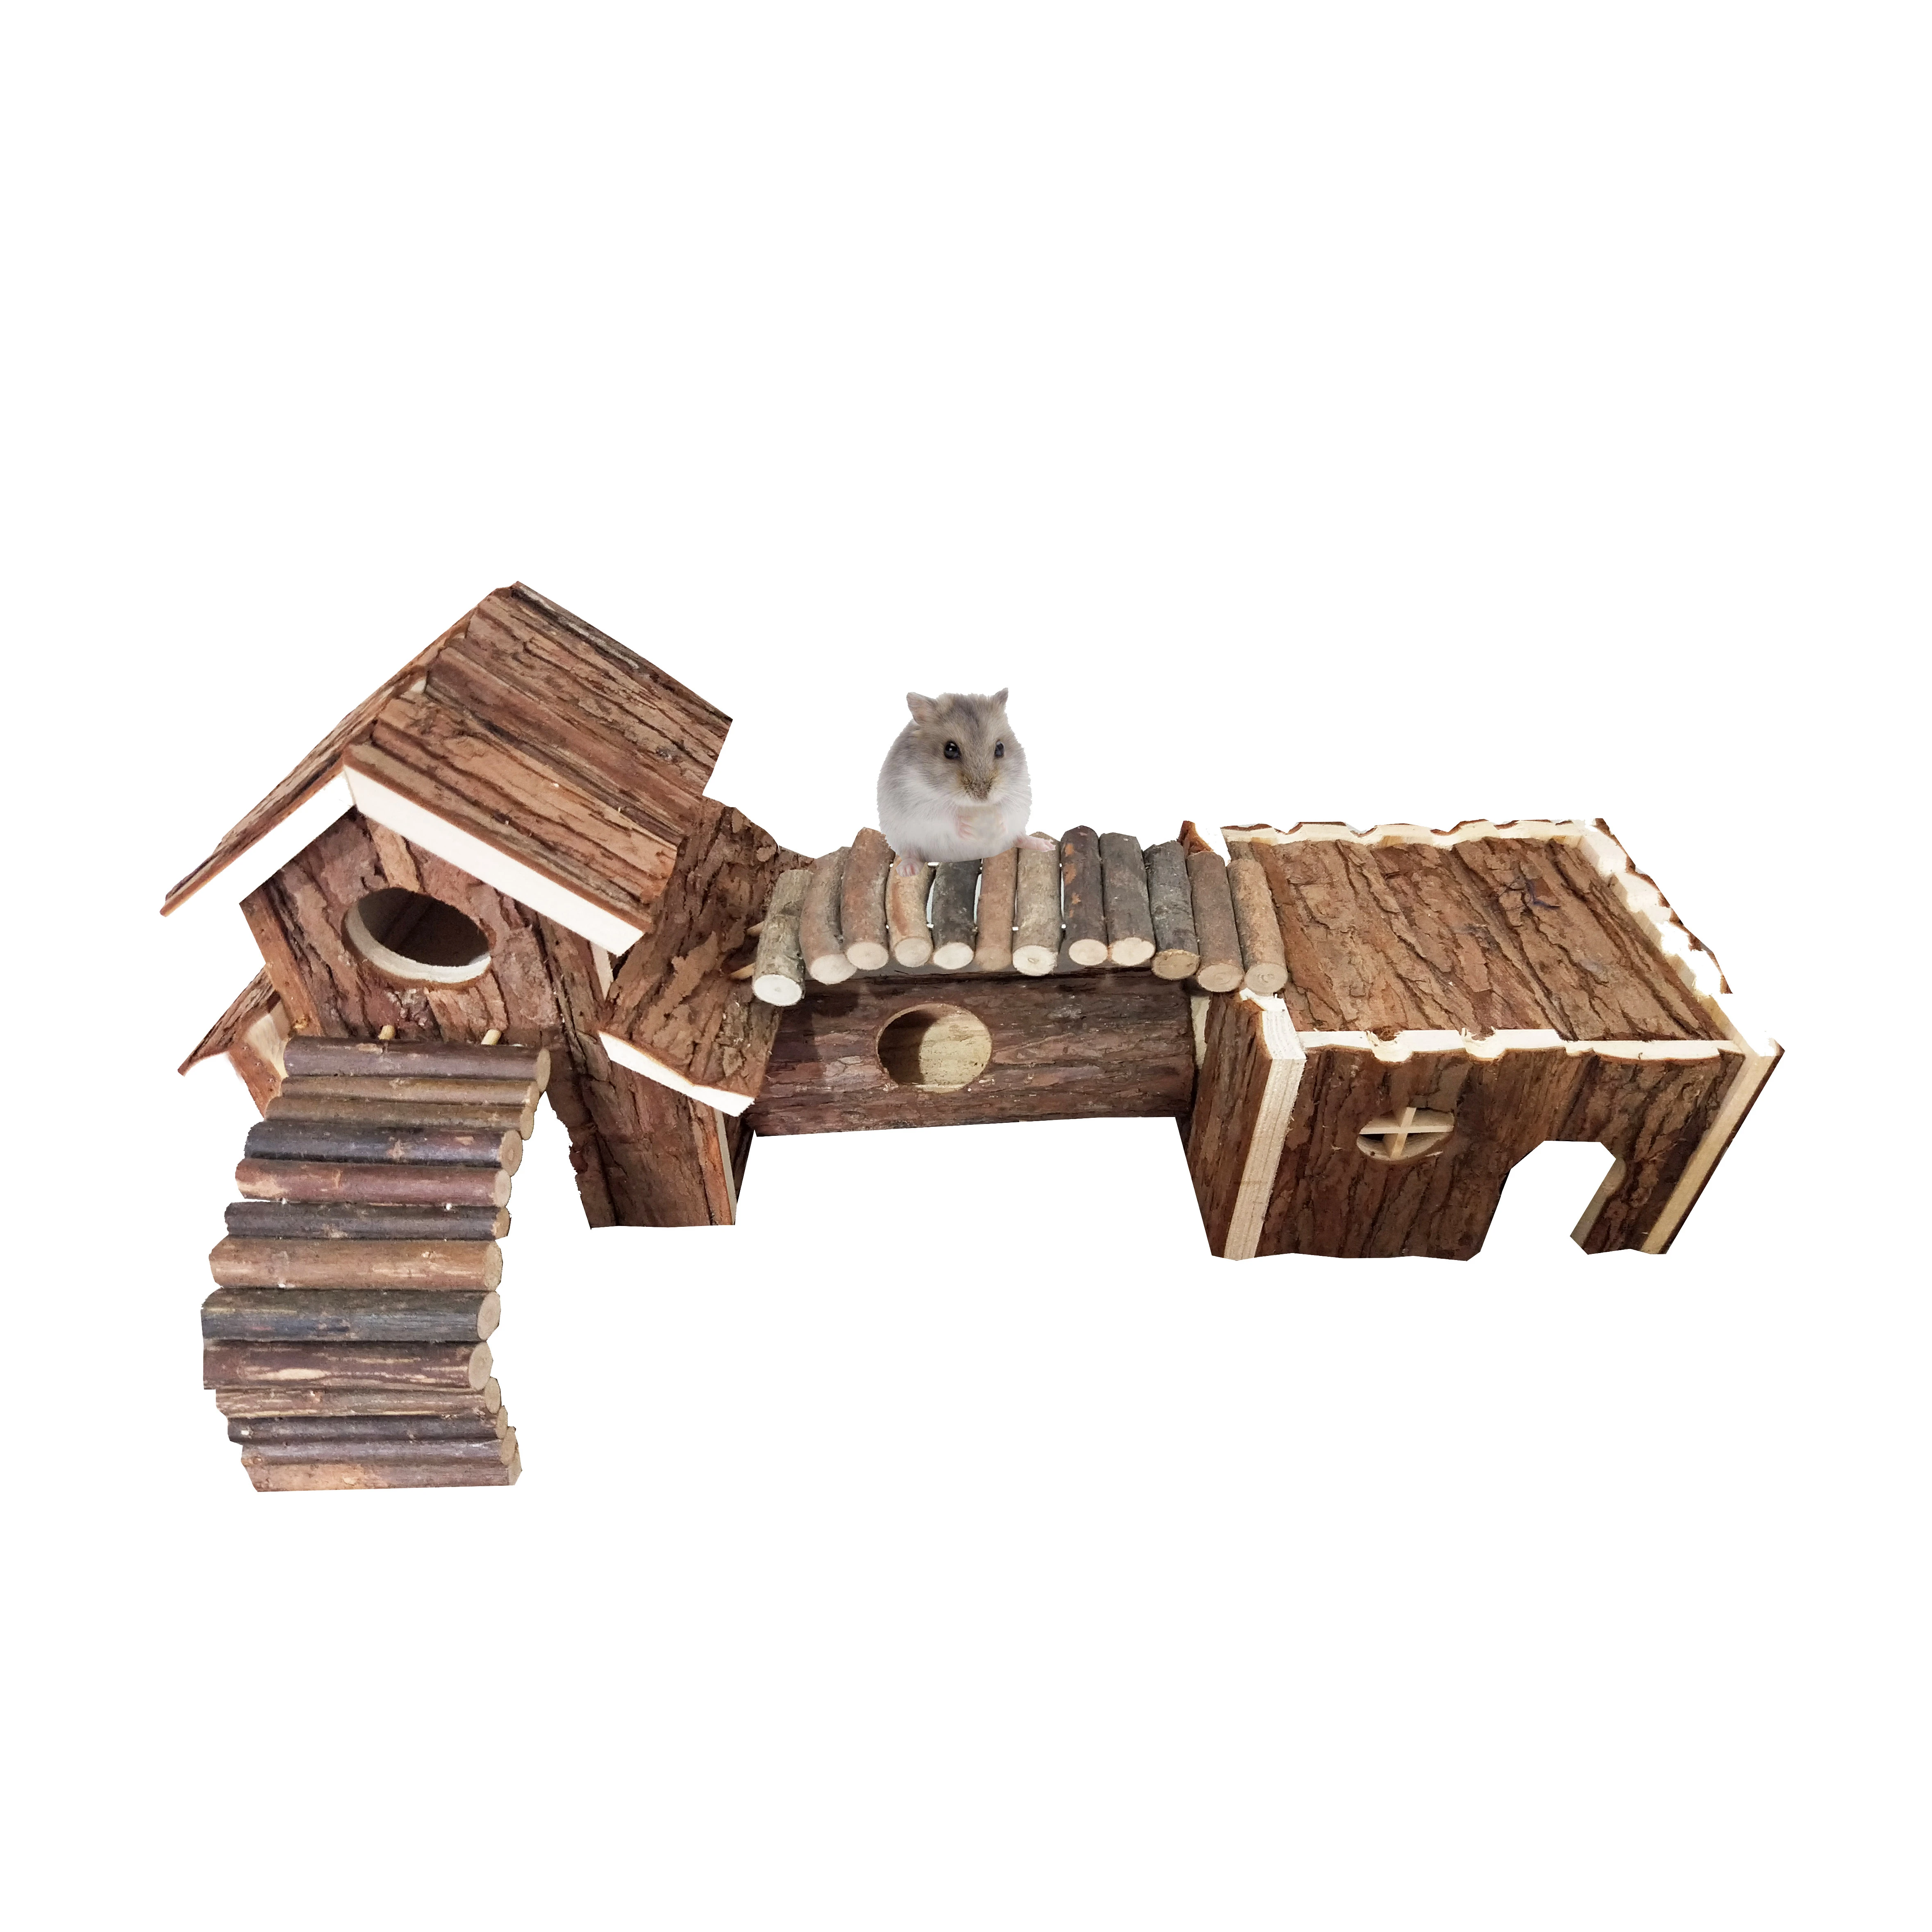 chimney small pet hiding place small animal play house and their small toys